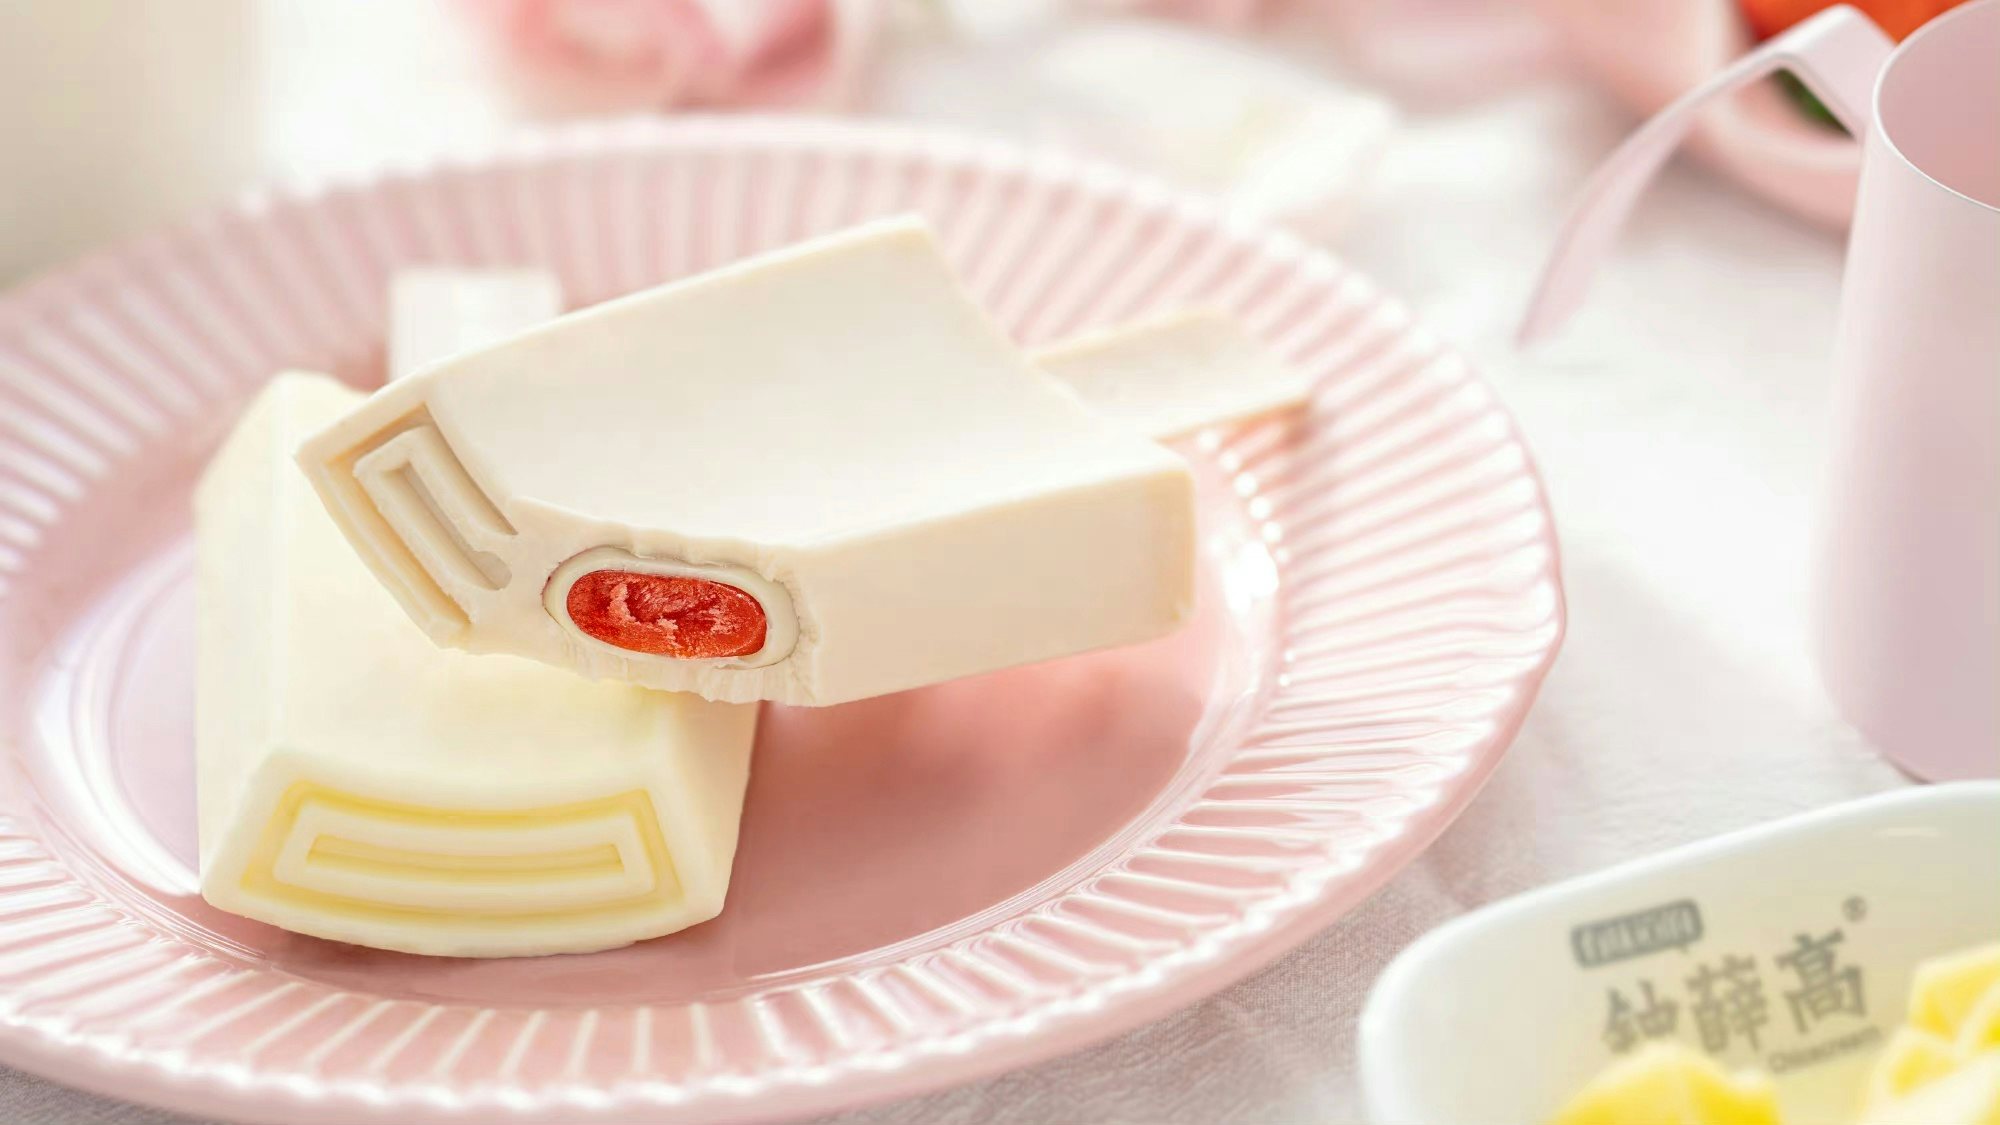 China’s consumer rights watchdog has just listed the top controversies of 2022. Luxury brands should carefully review them to avoid backlash in 2023. Photo: Chicecream